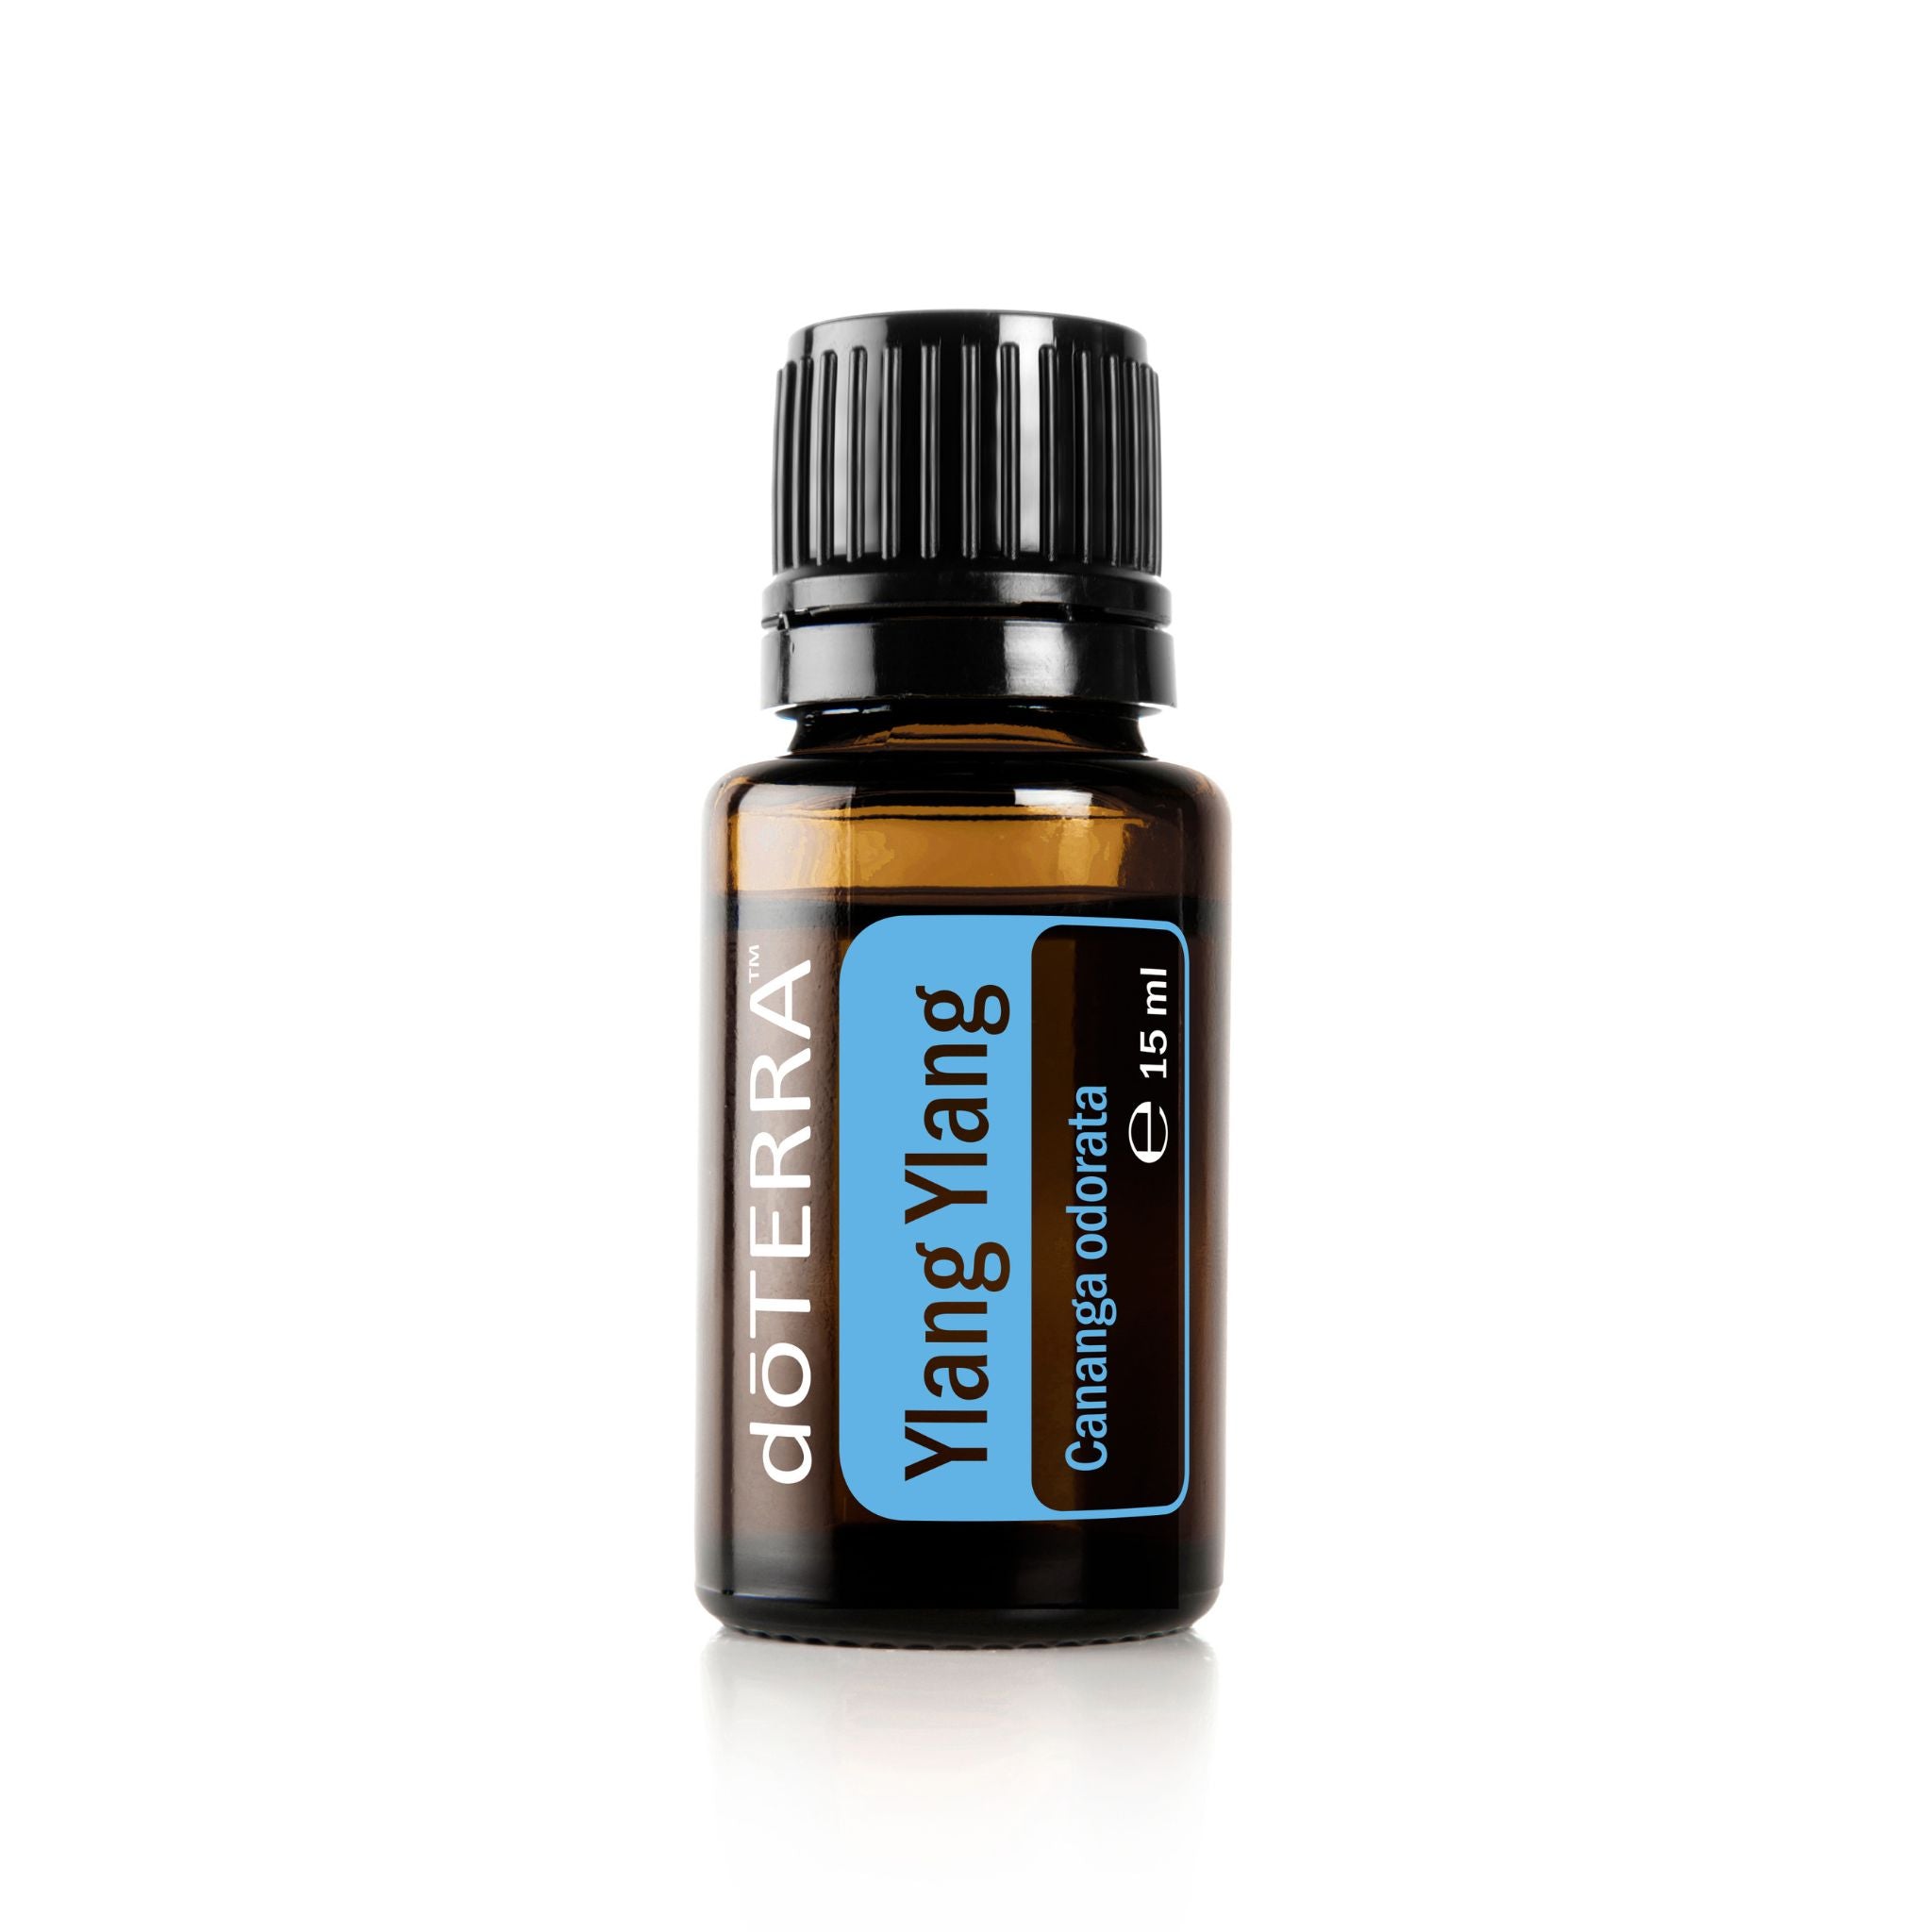 Doterra Essential Oil Singles - scent Ylang Ylang